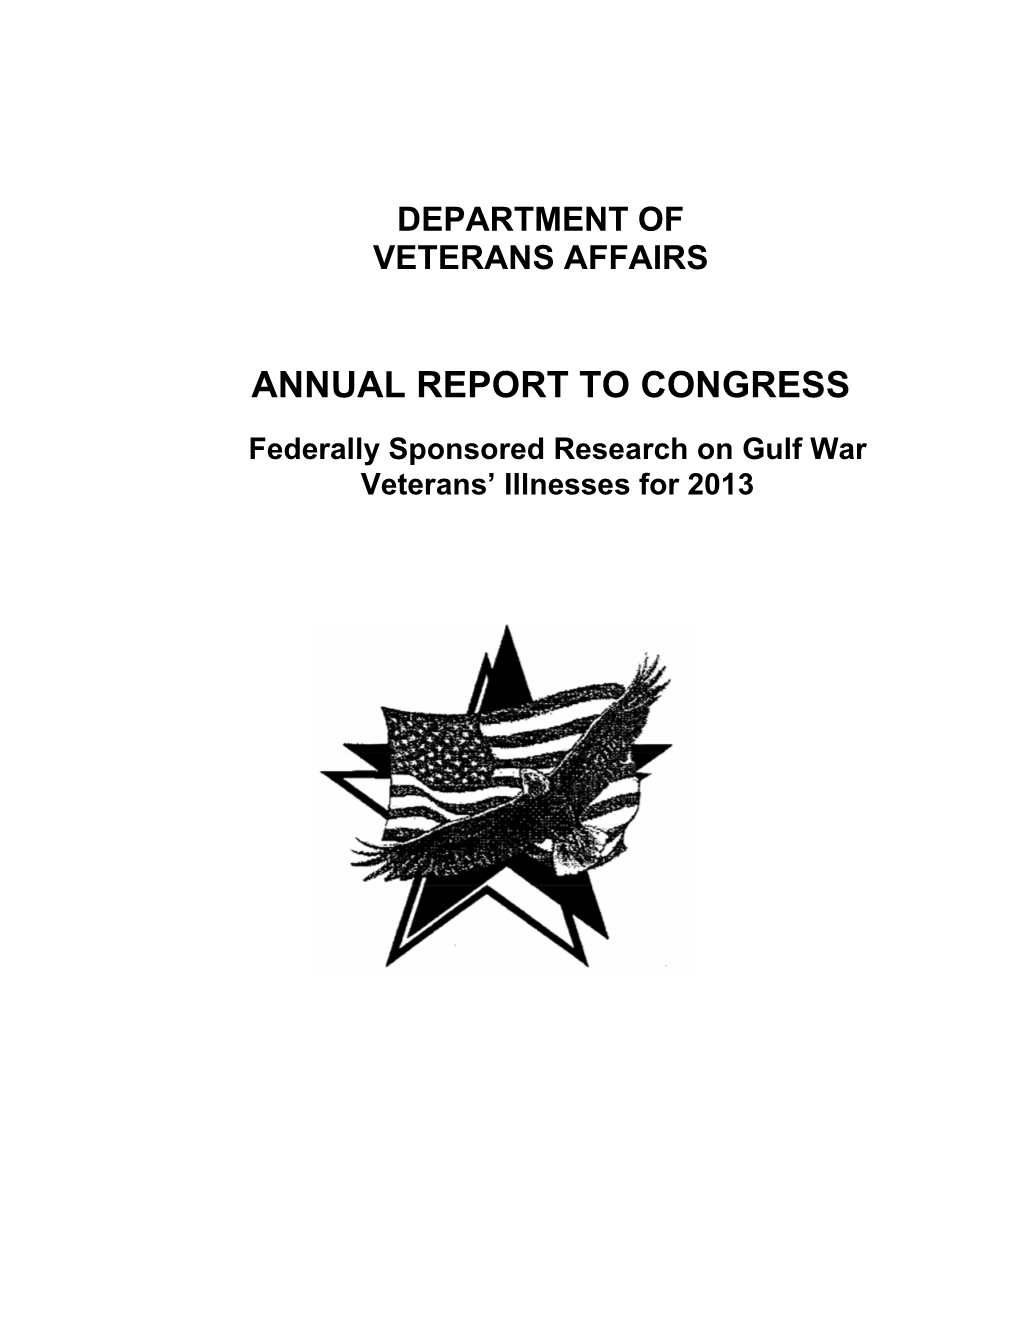 Annual Report to Congress Gulf War Veterans' Illnesses for 2013